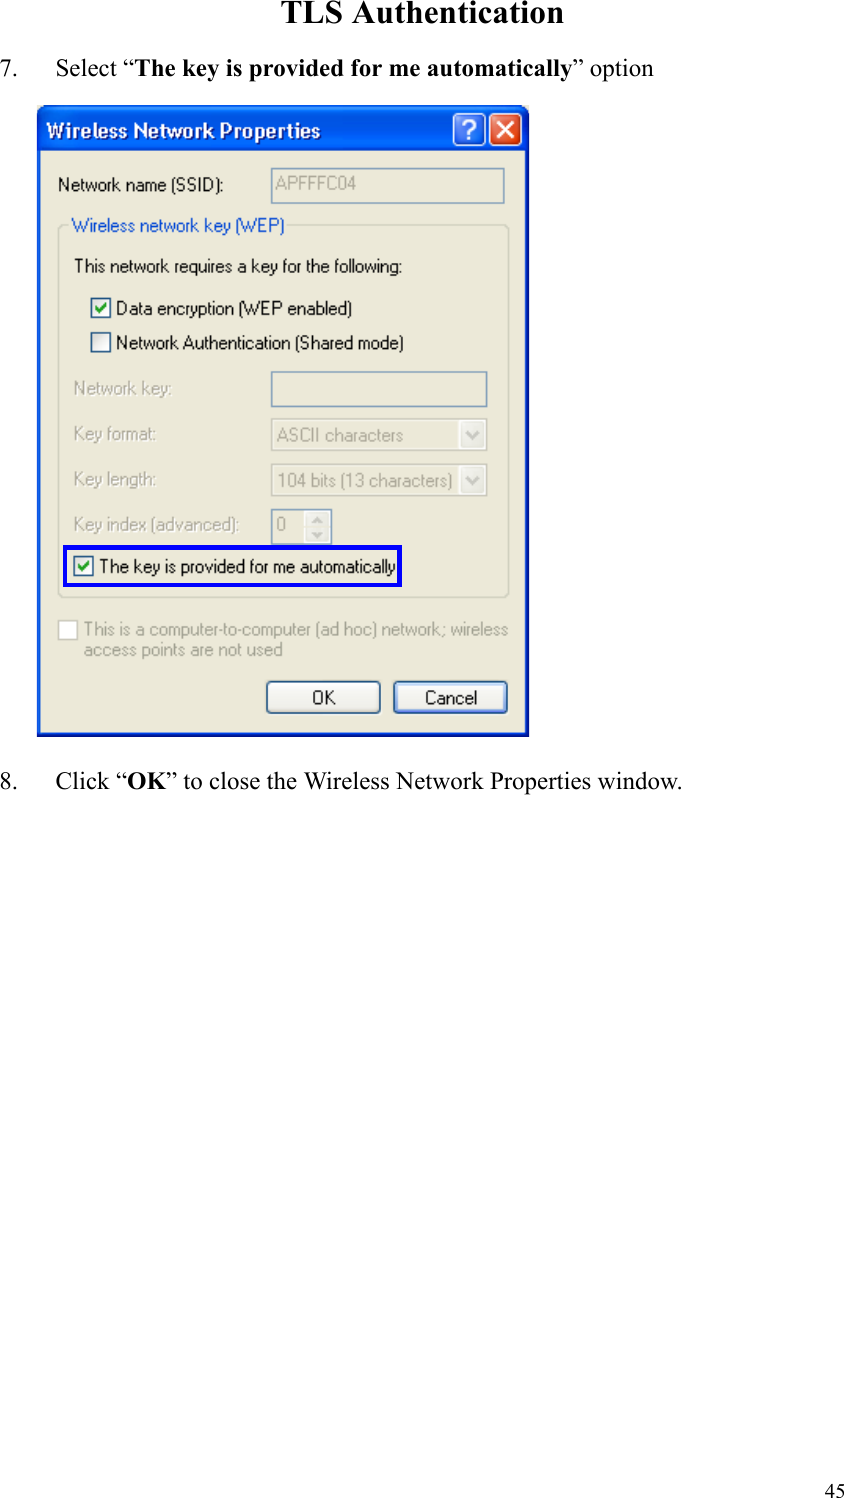 45TLS Authentication7. Select “The key is provided for me automatically” option8. Click “OK” to close the Wireless Network Properties window.